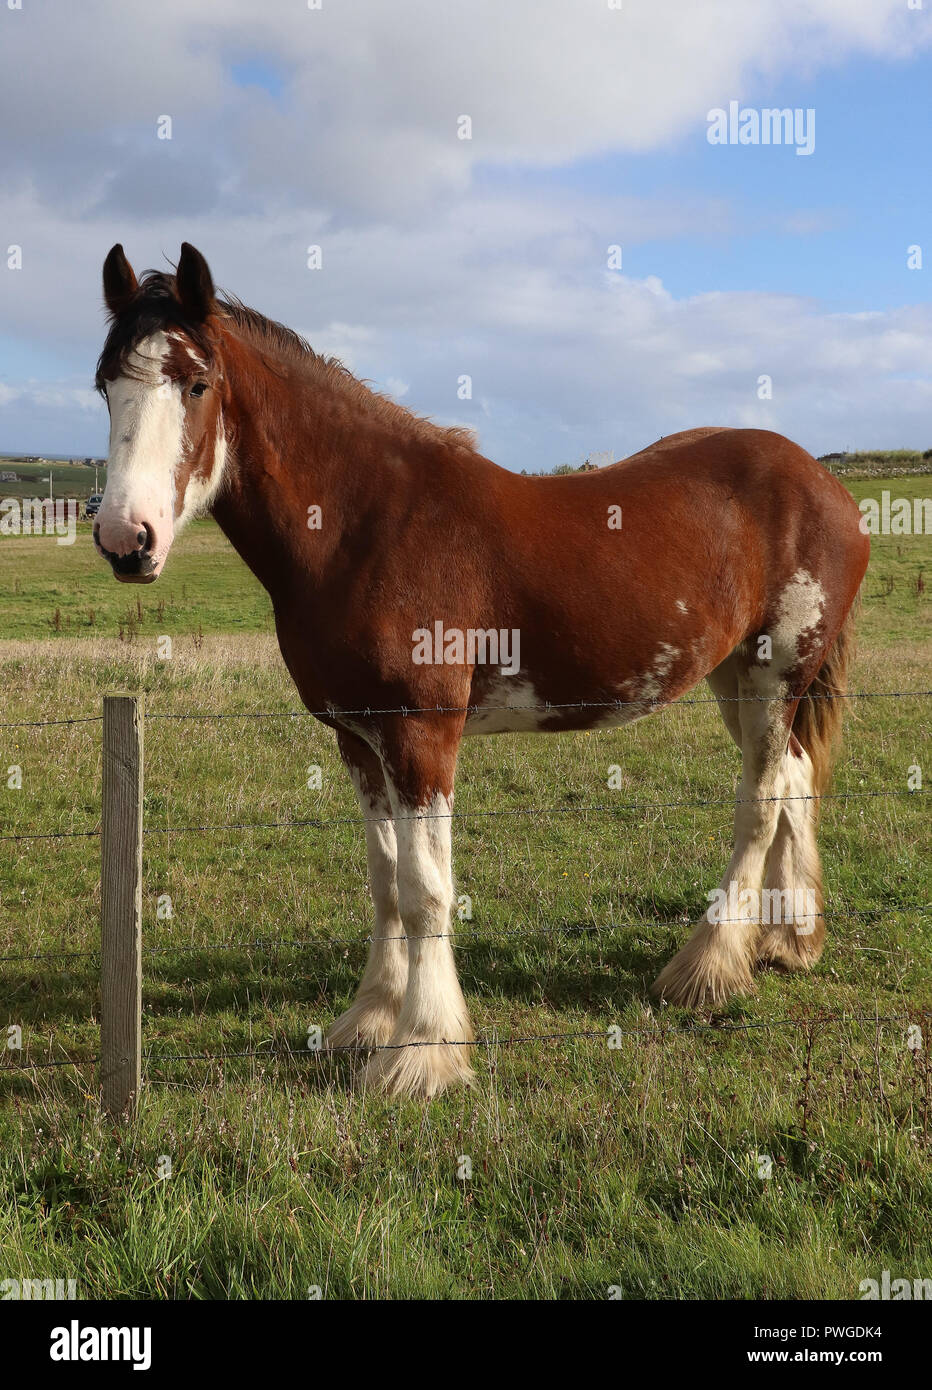 Clydesdale horse, chestnut with white leg and facial markings, poses at the edge of his green grassy field on Burray Island in the Orkneys, Scotland. Stock Photo